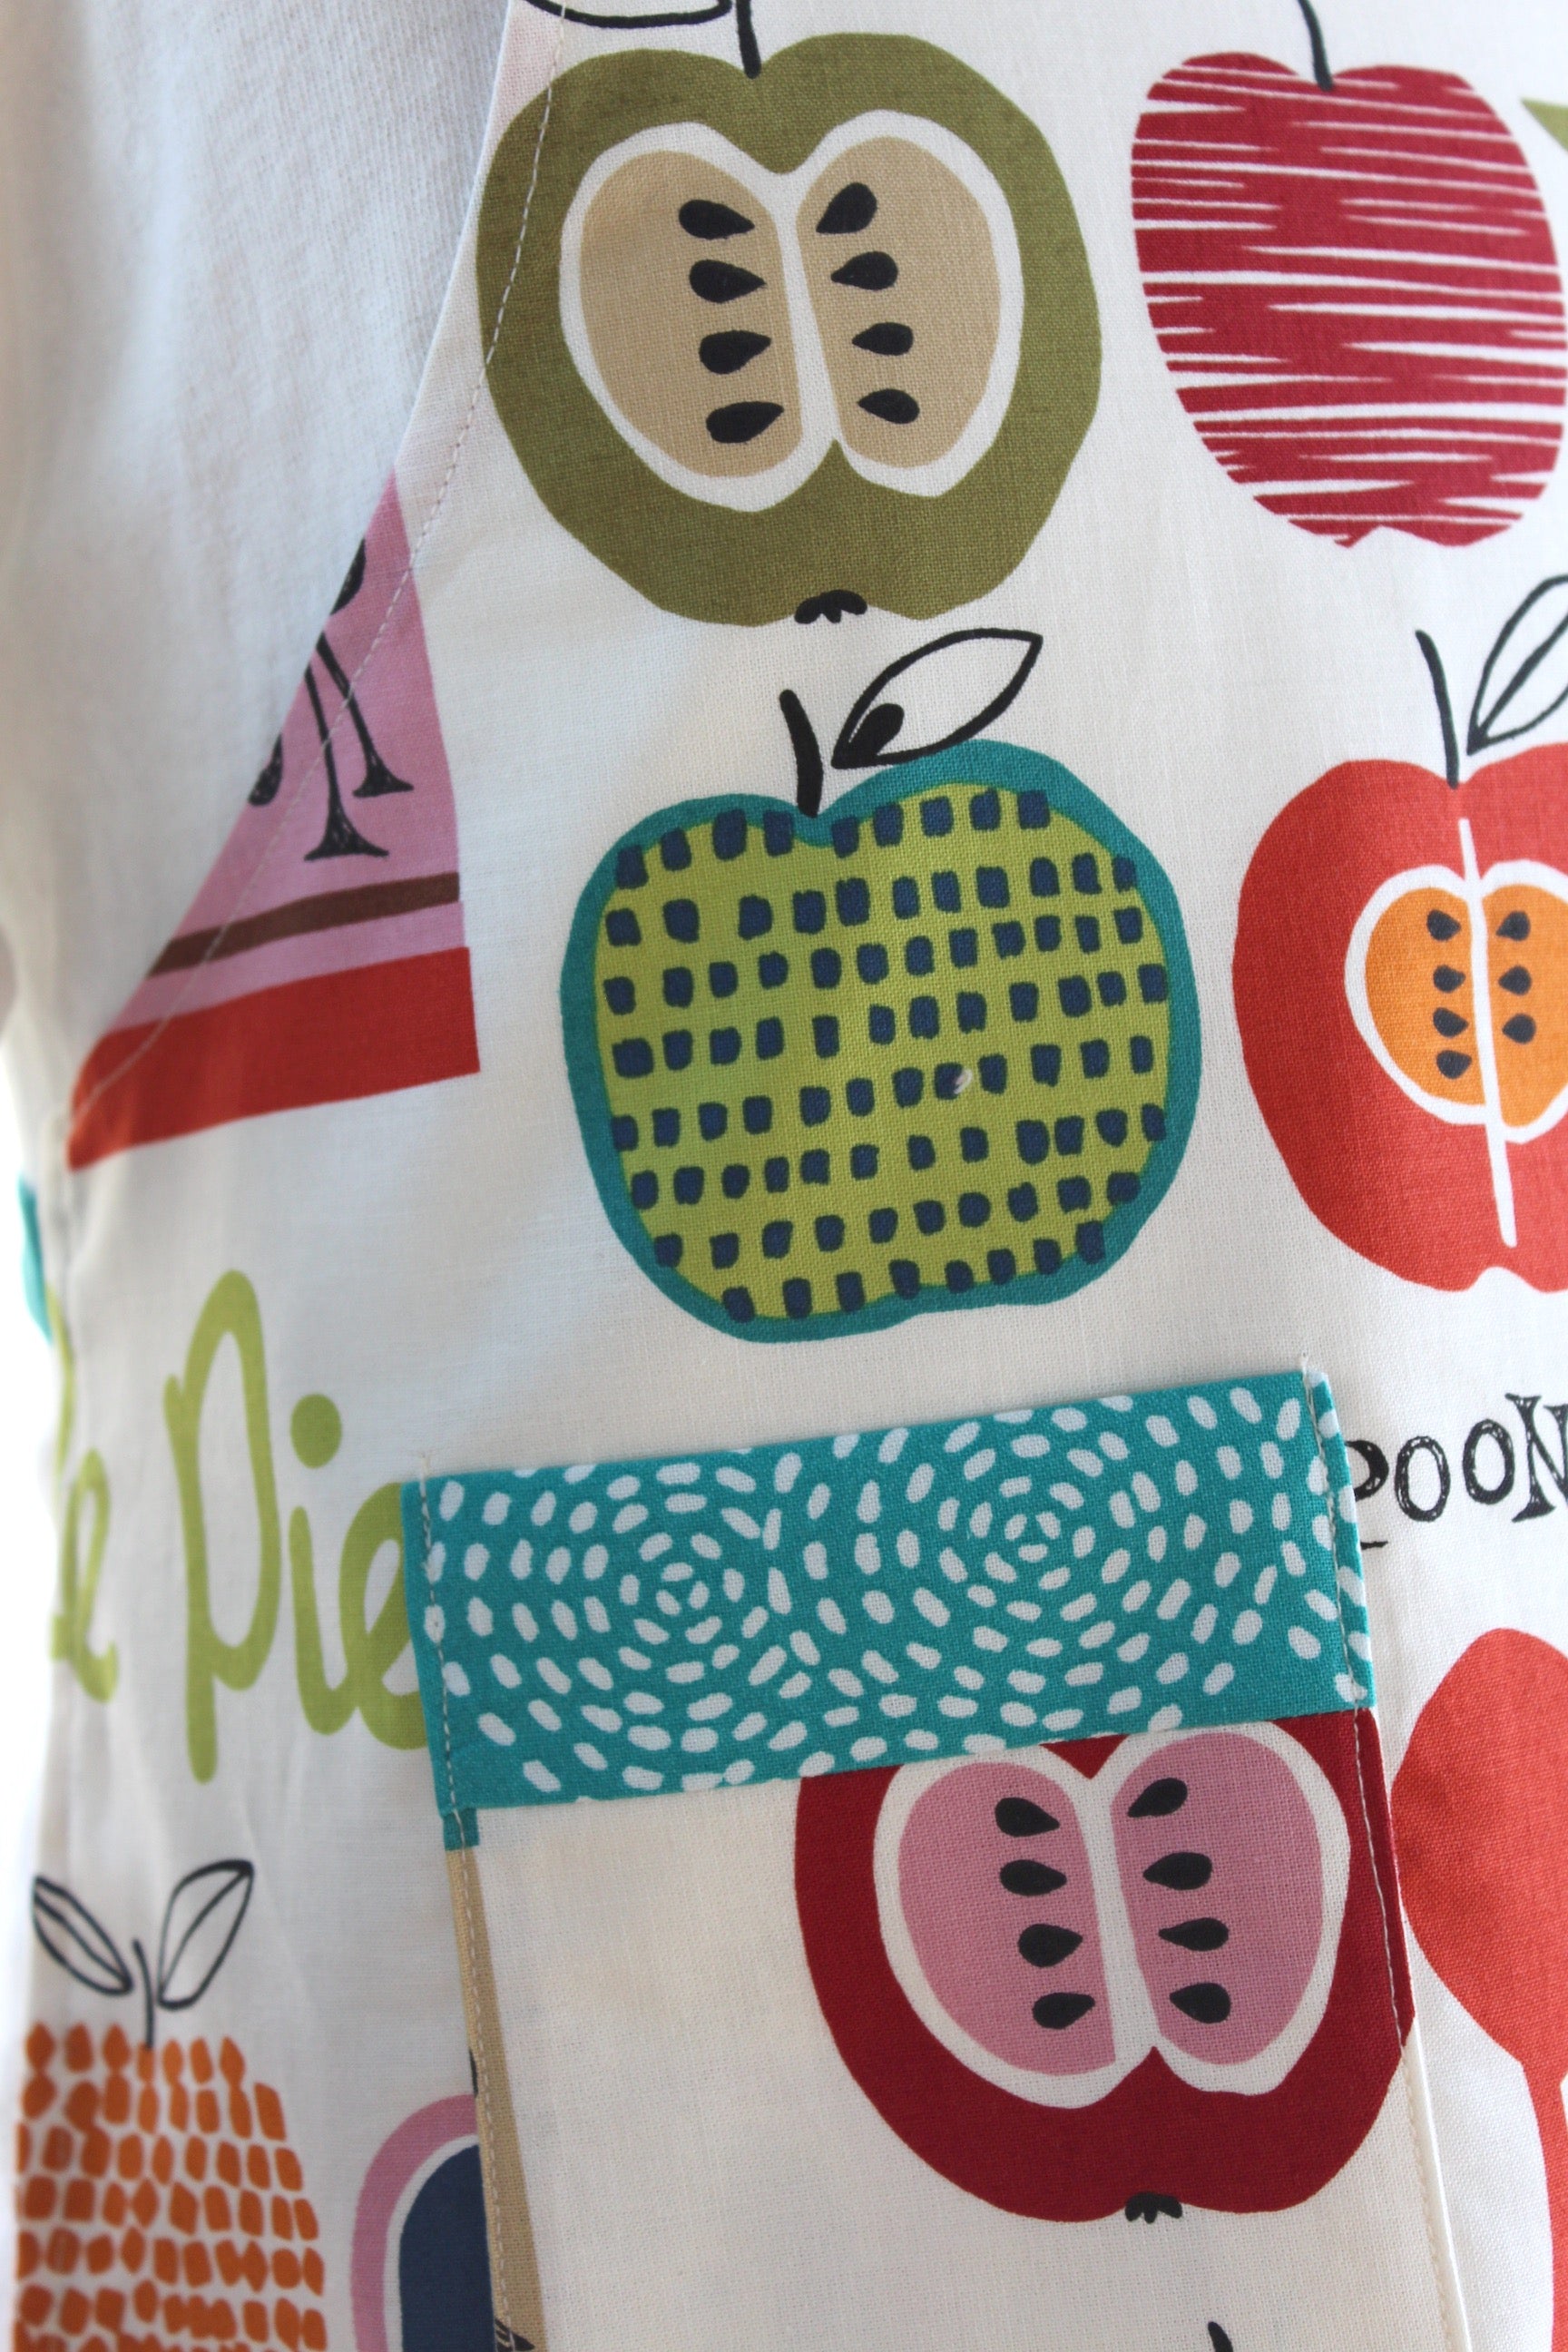 Apple Pie Kid's Apron-The Blue Peony-Age Group_Kids,Category_Apron,Gender_Boys,Gender_Girls,Material_Cotton,Size_Medium (ages 6-11),Size_Small (ages up to 5),Theme_Food